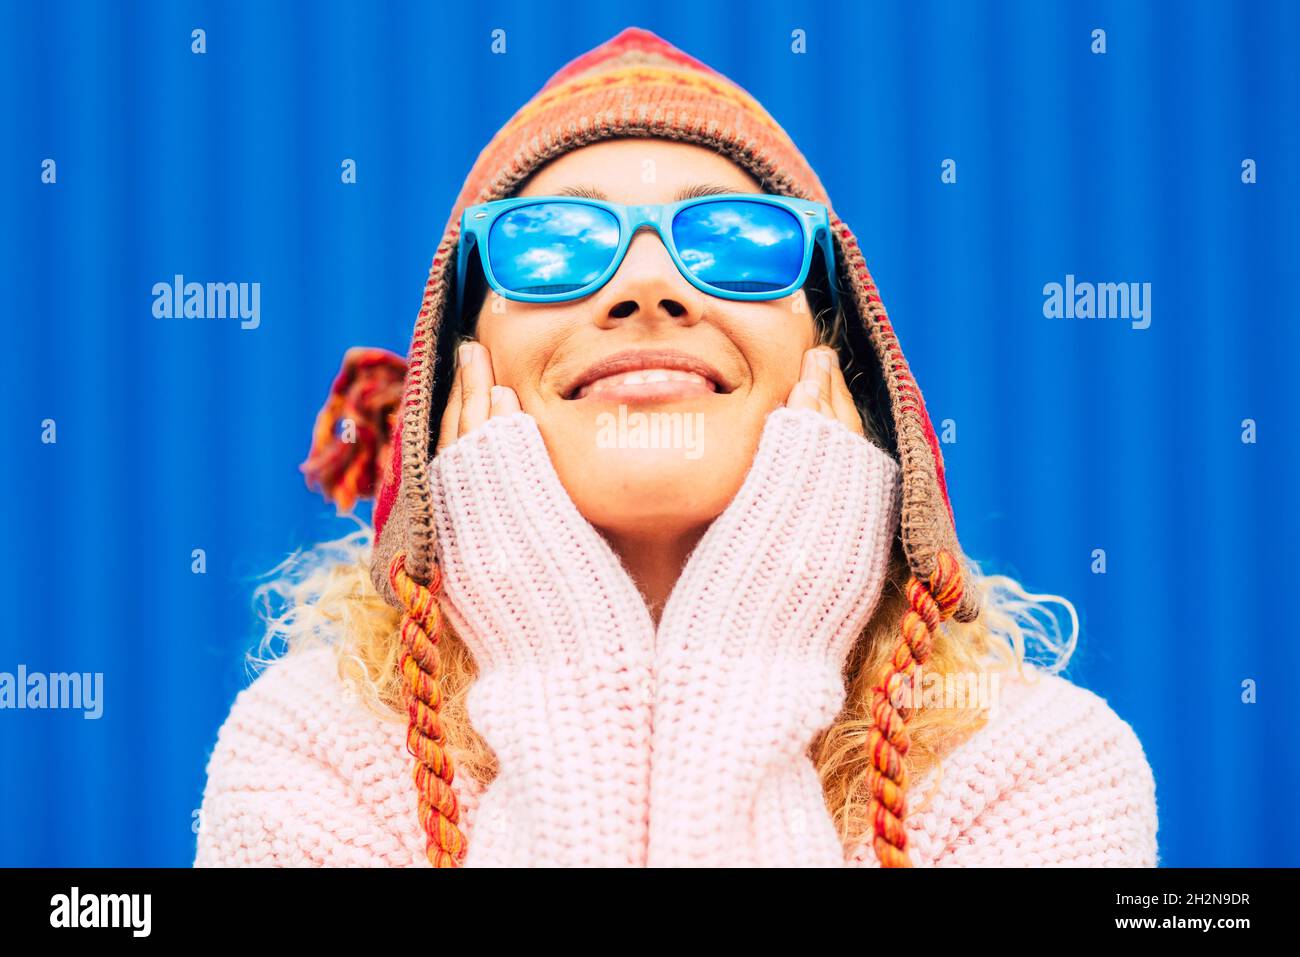 Smiling woman wearing sunglasses and knit hat while touching face Stock Photo